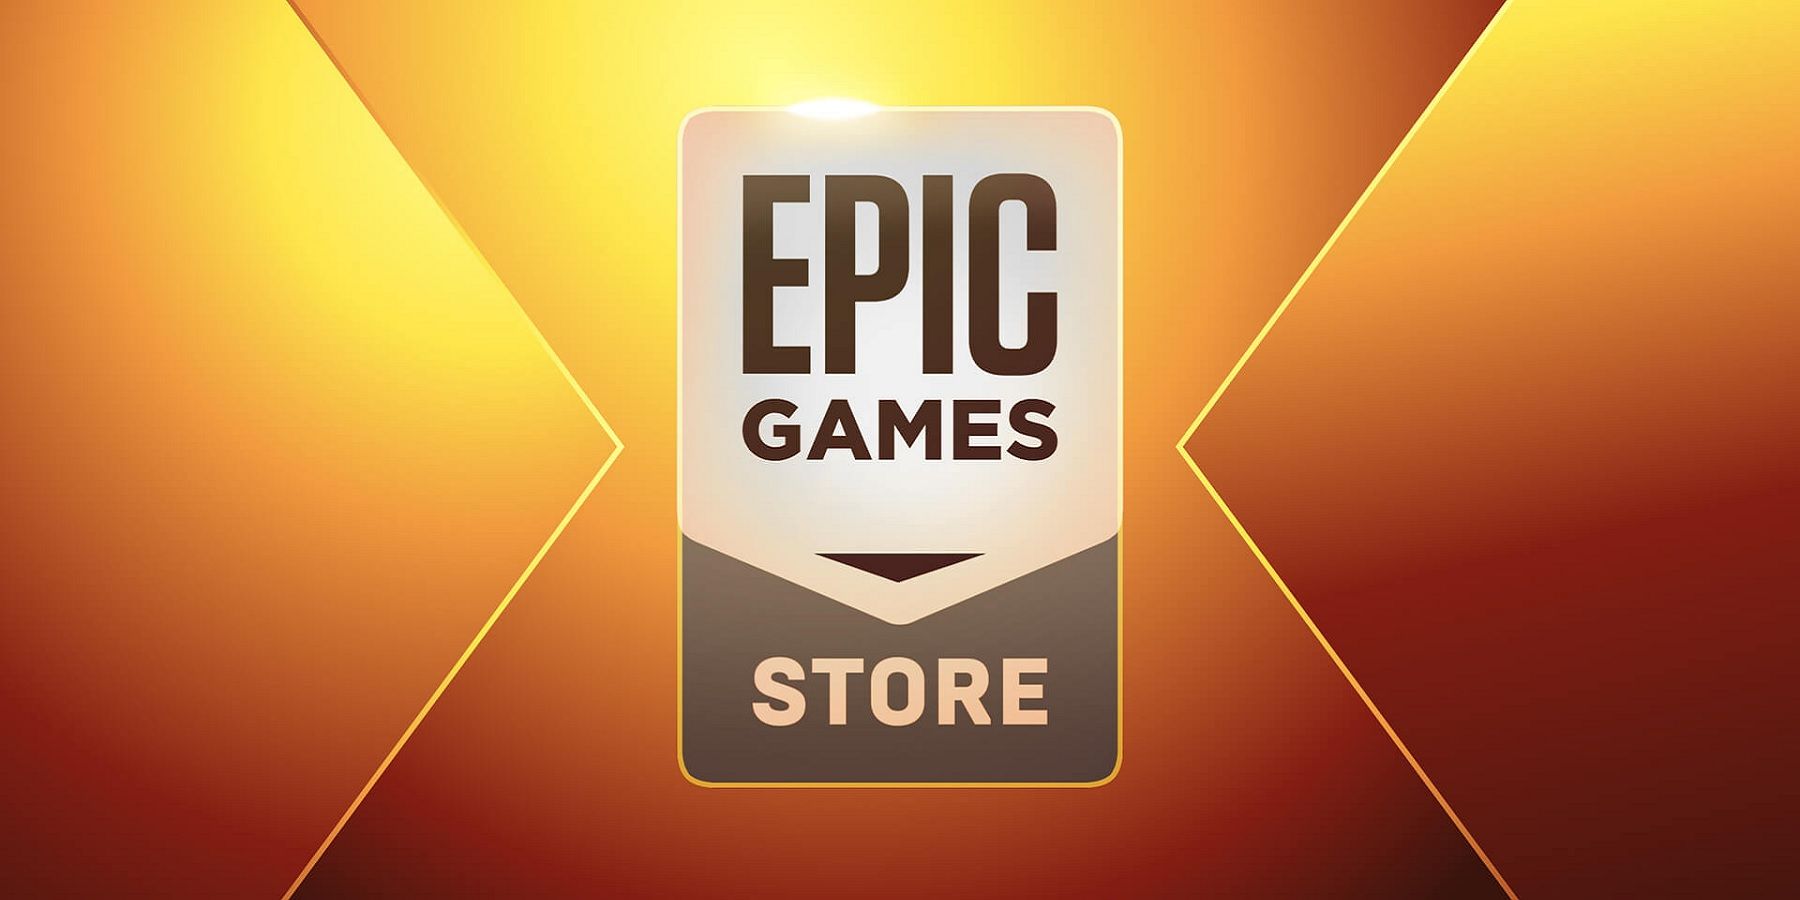 Halloween World  Download and Play for Free - Epic Games Store